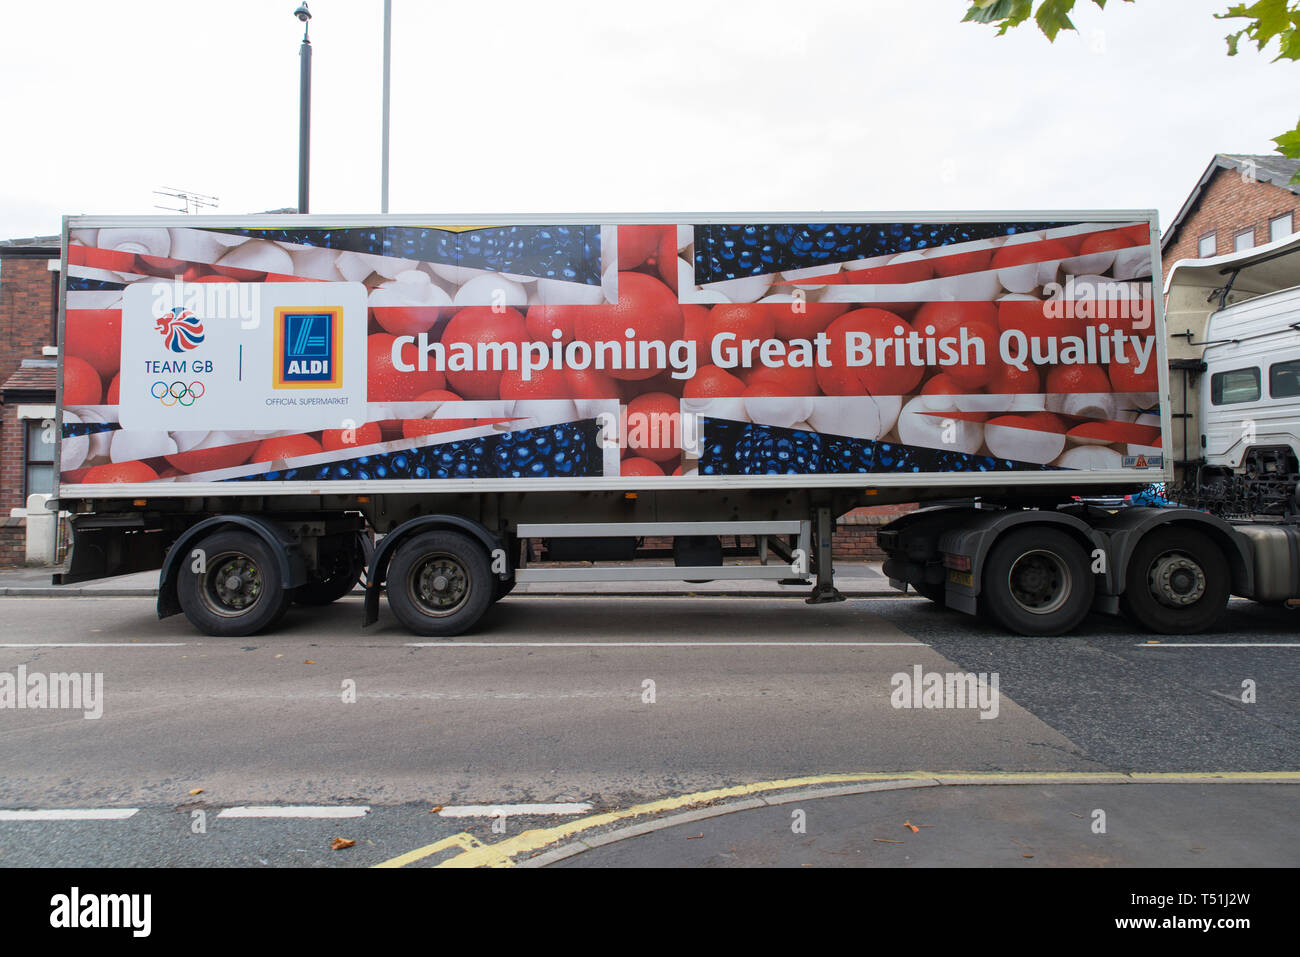 An Aldi - a German supermarket brand - truck passing through Omskirk, West Lancashire, with an image championing British products, Great Britain. Stock Photo